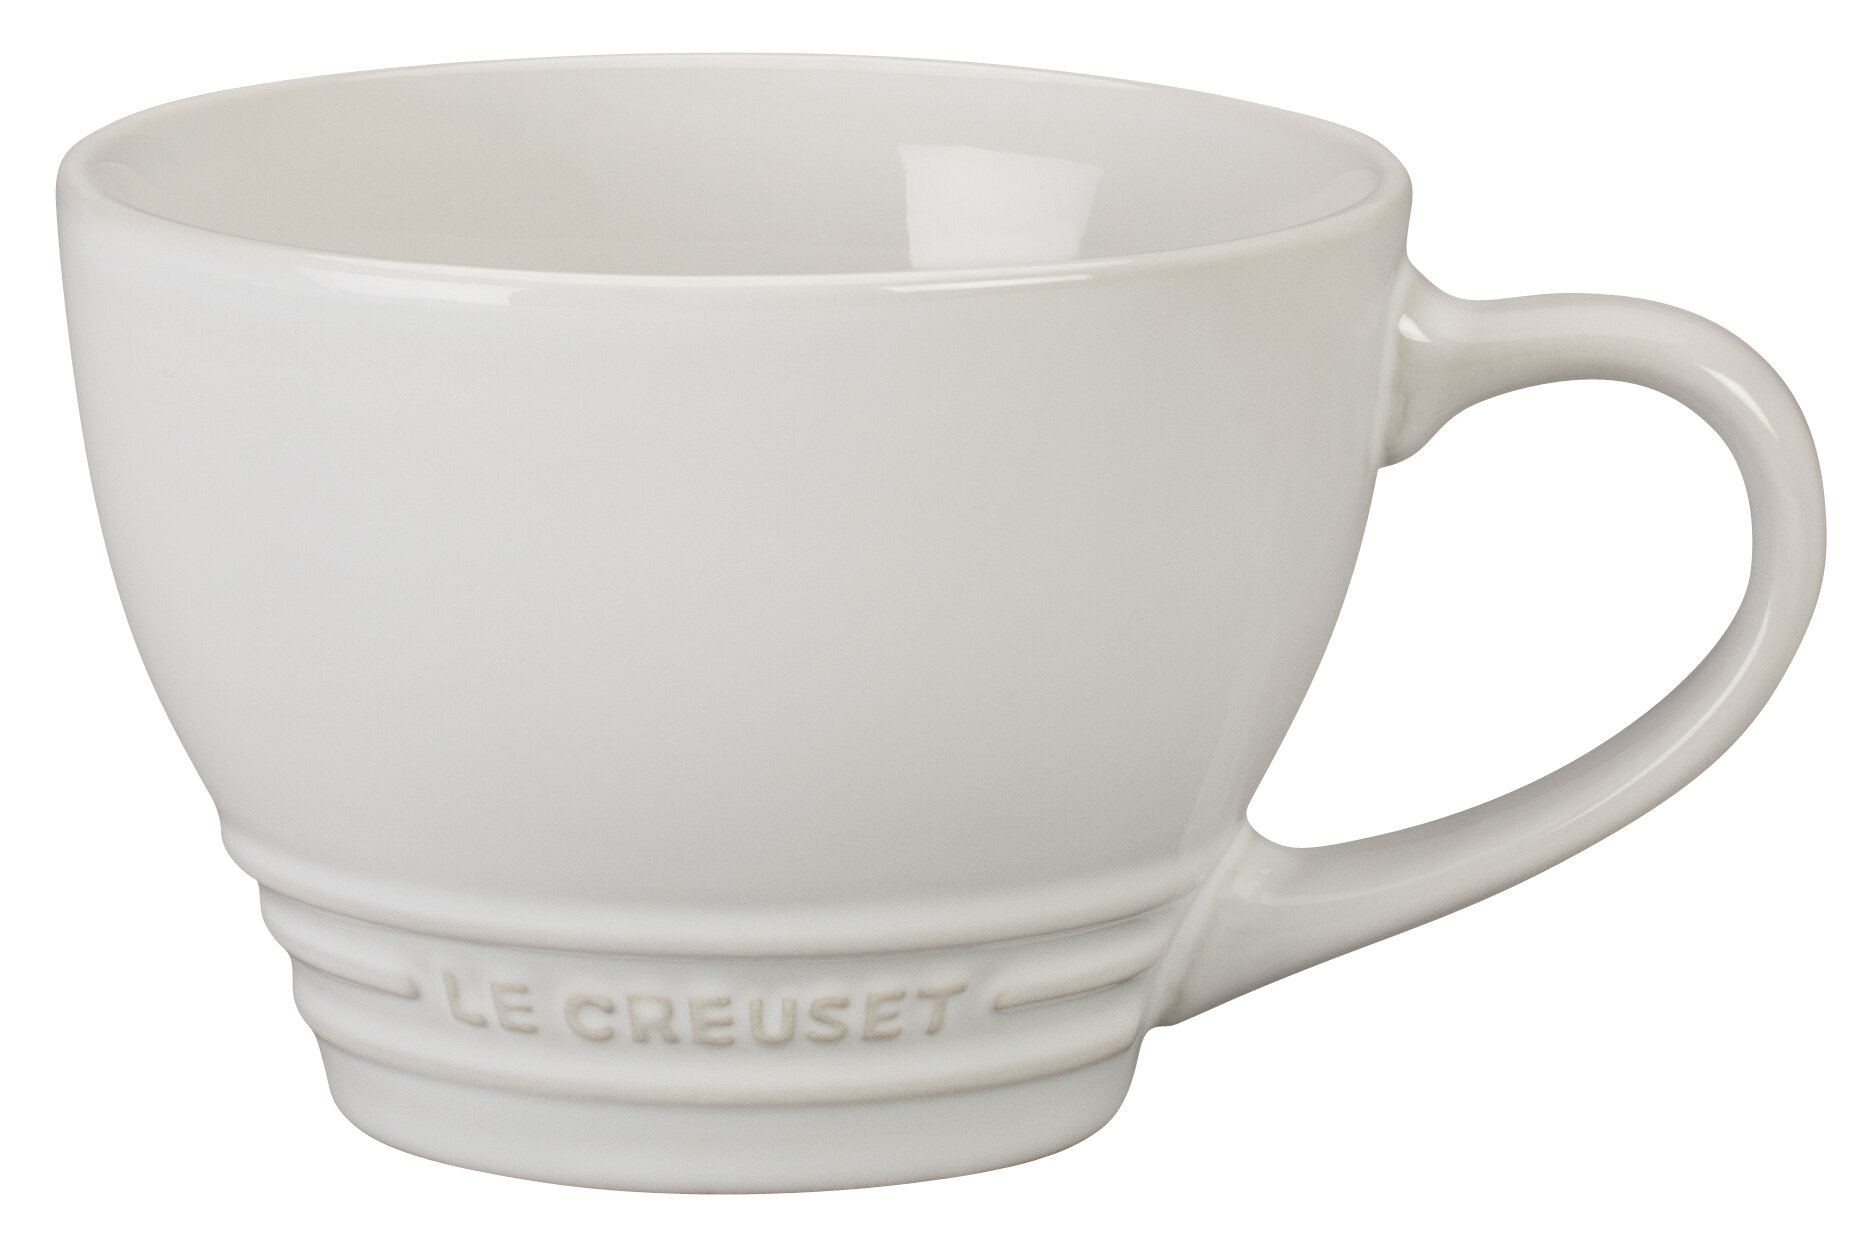 Le Creuset Cappuccino Cups and Saucers, Set of 4